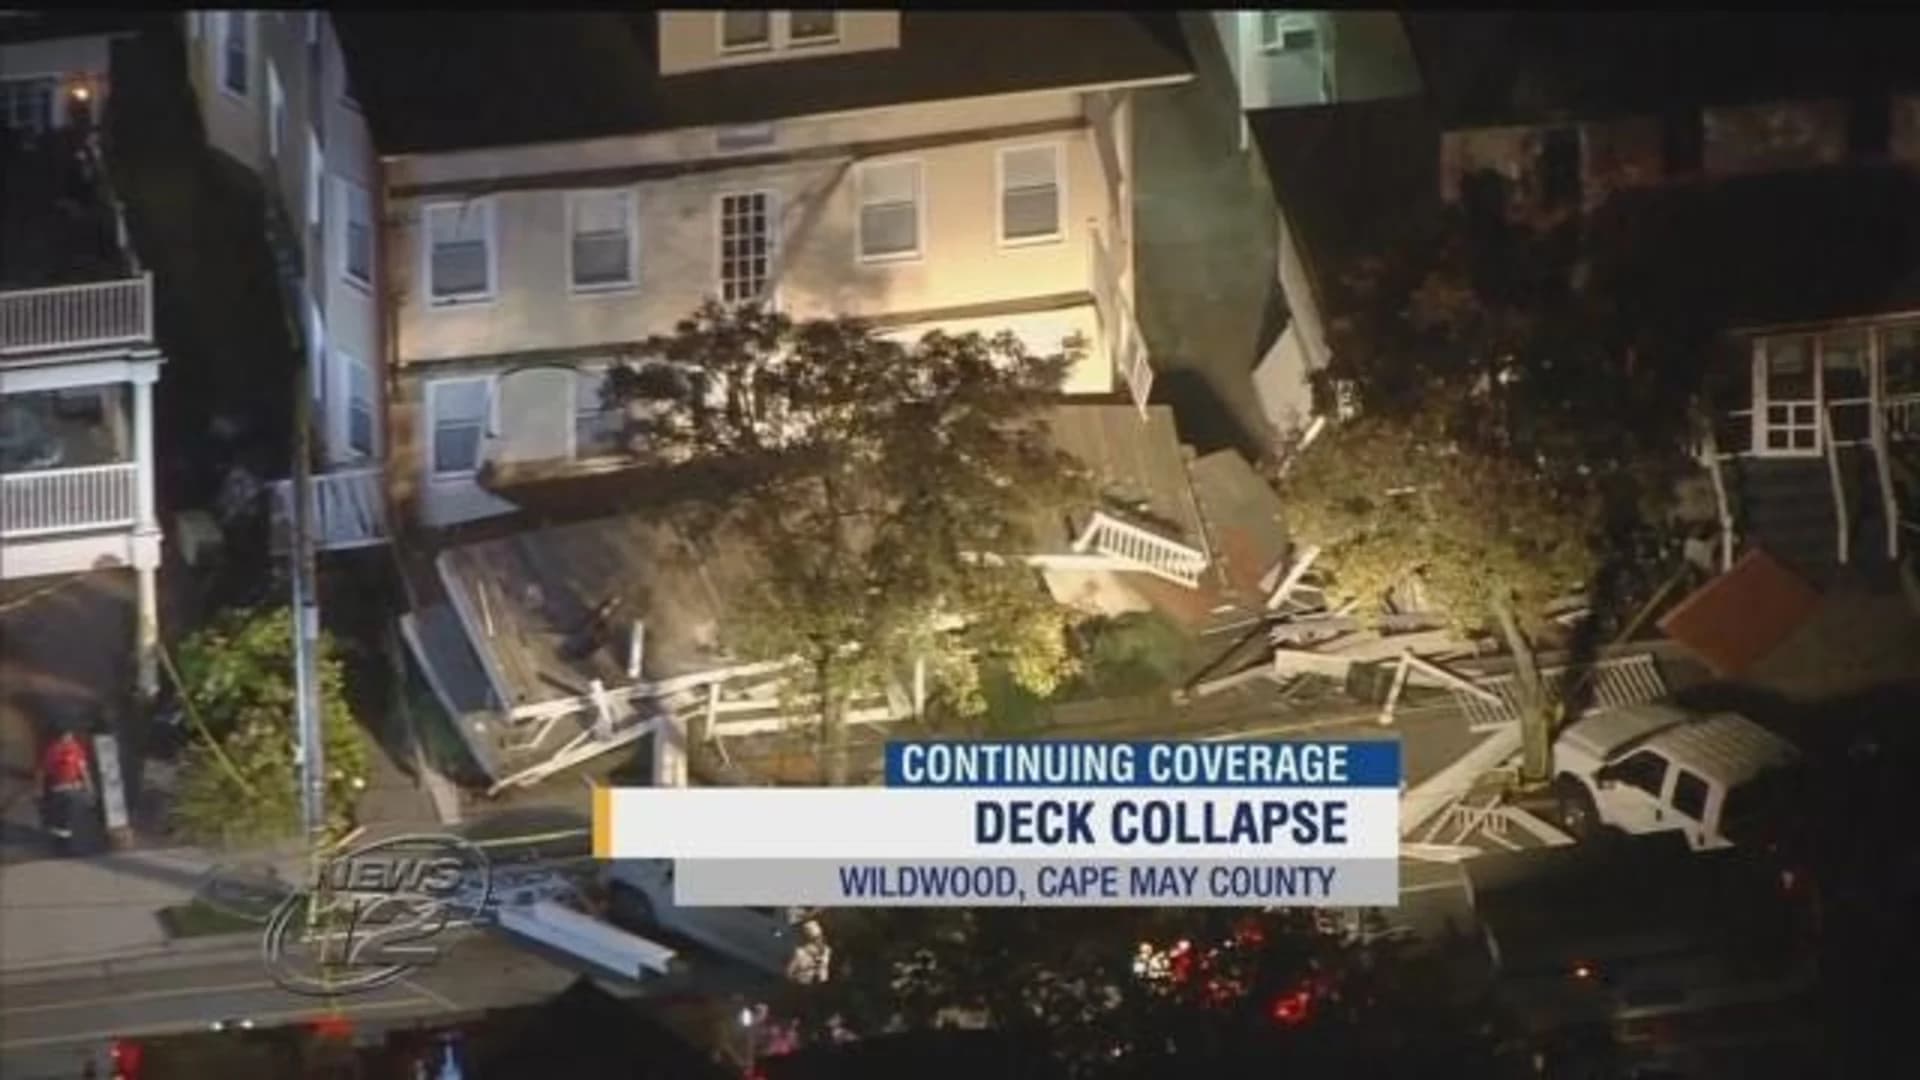 Hospital officials: At least 22 injured when deck collapses in Wildwood